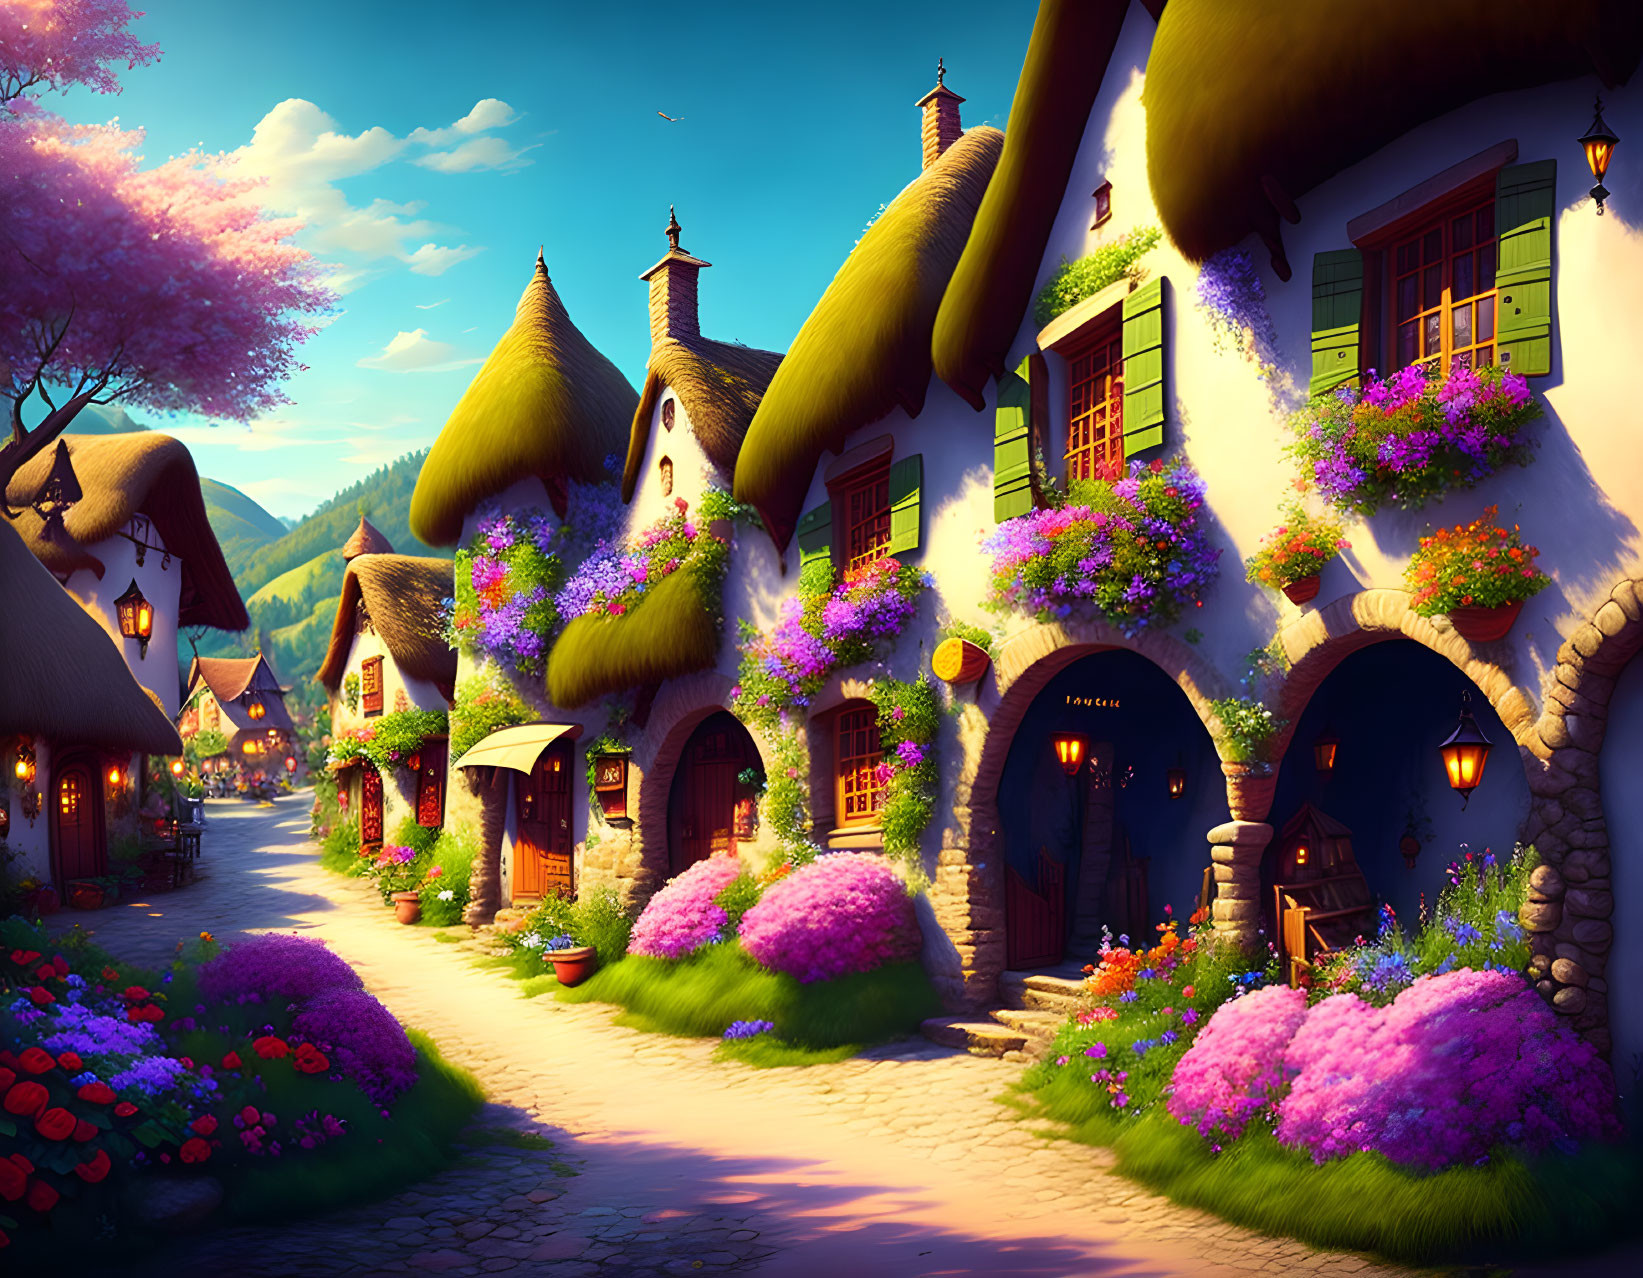 Quaint Thatched-Roof Cottages in Enchanting Village